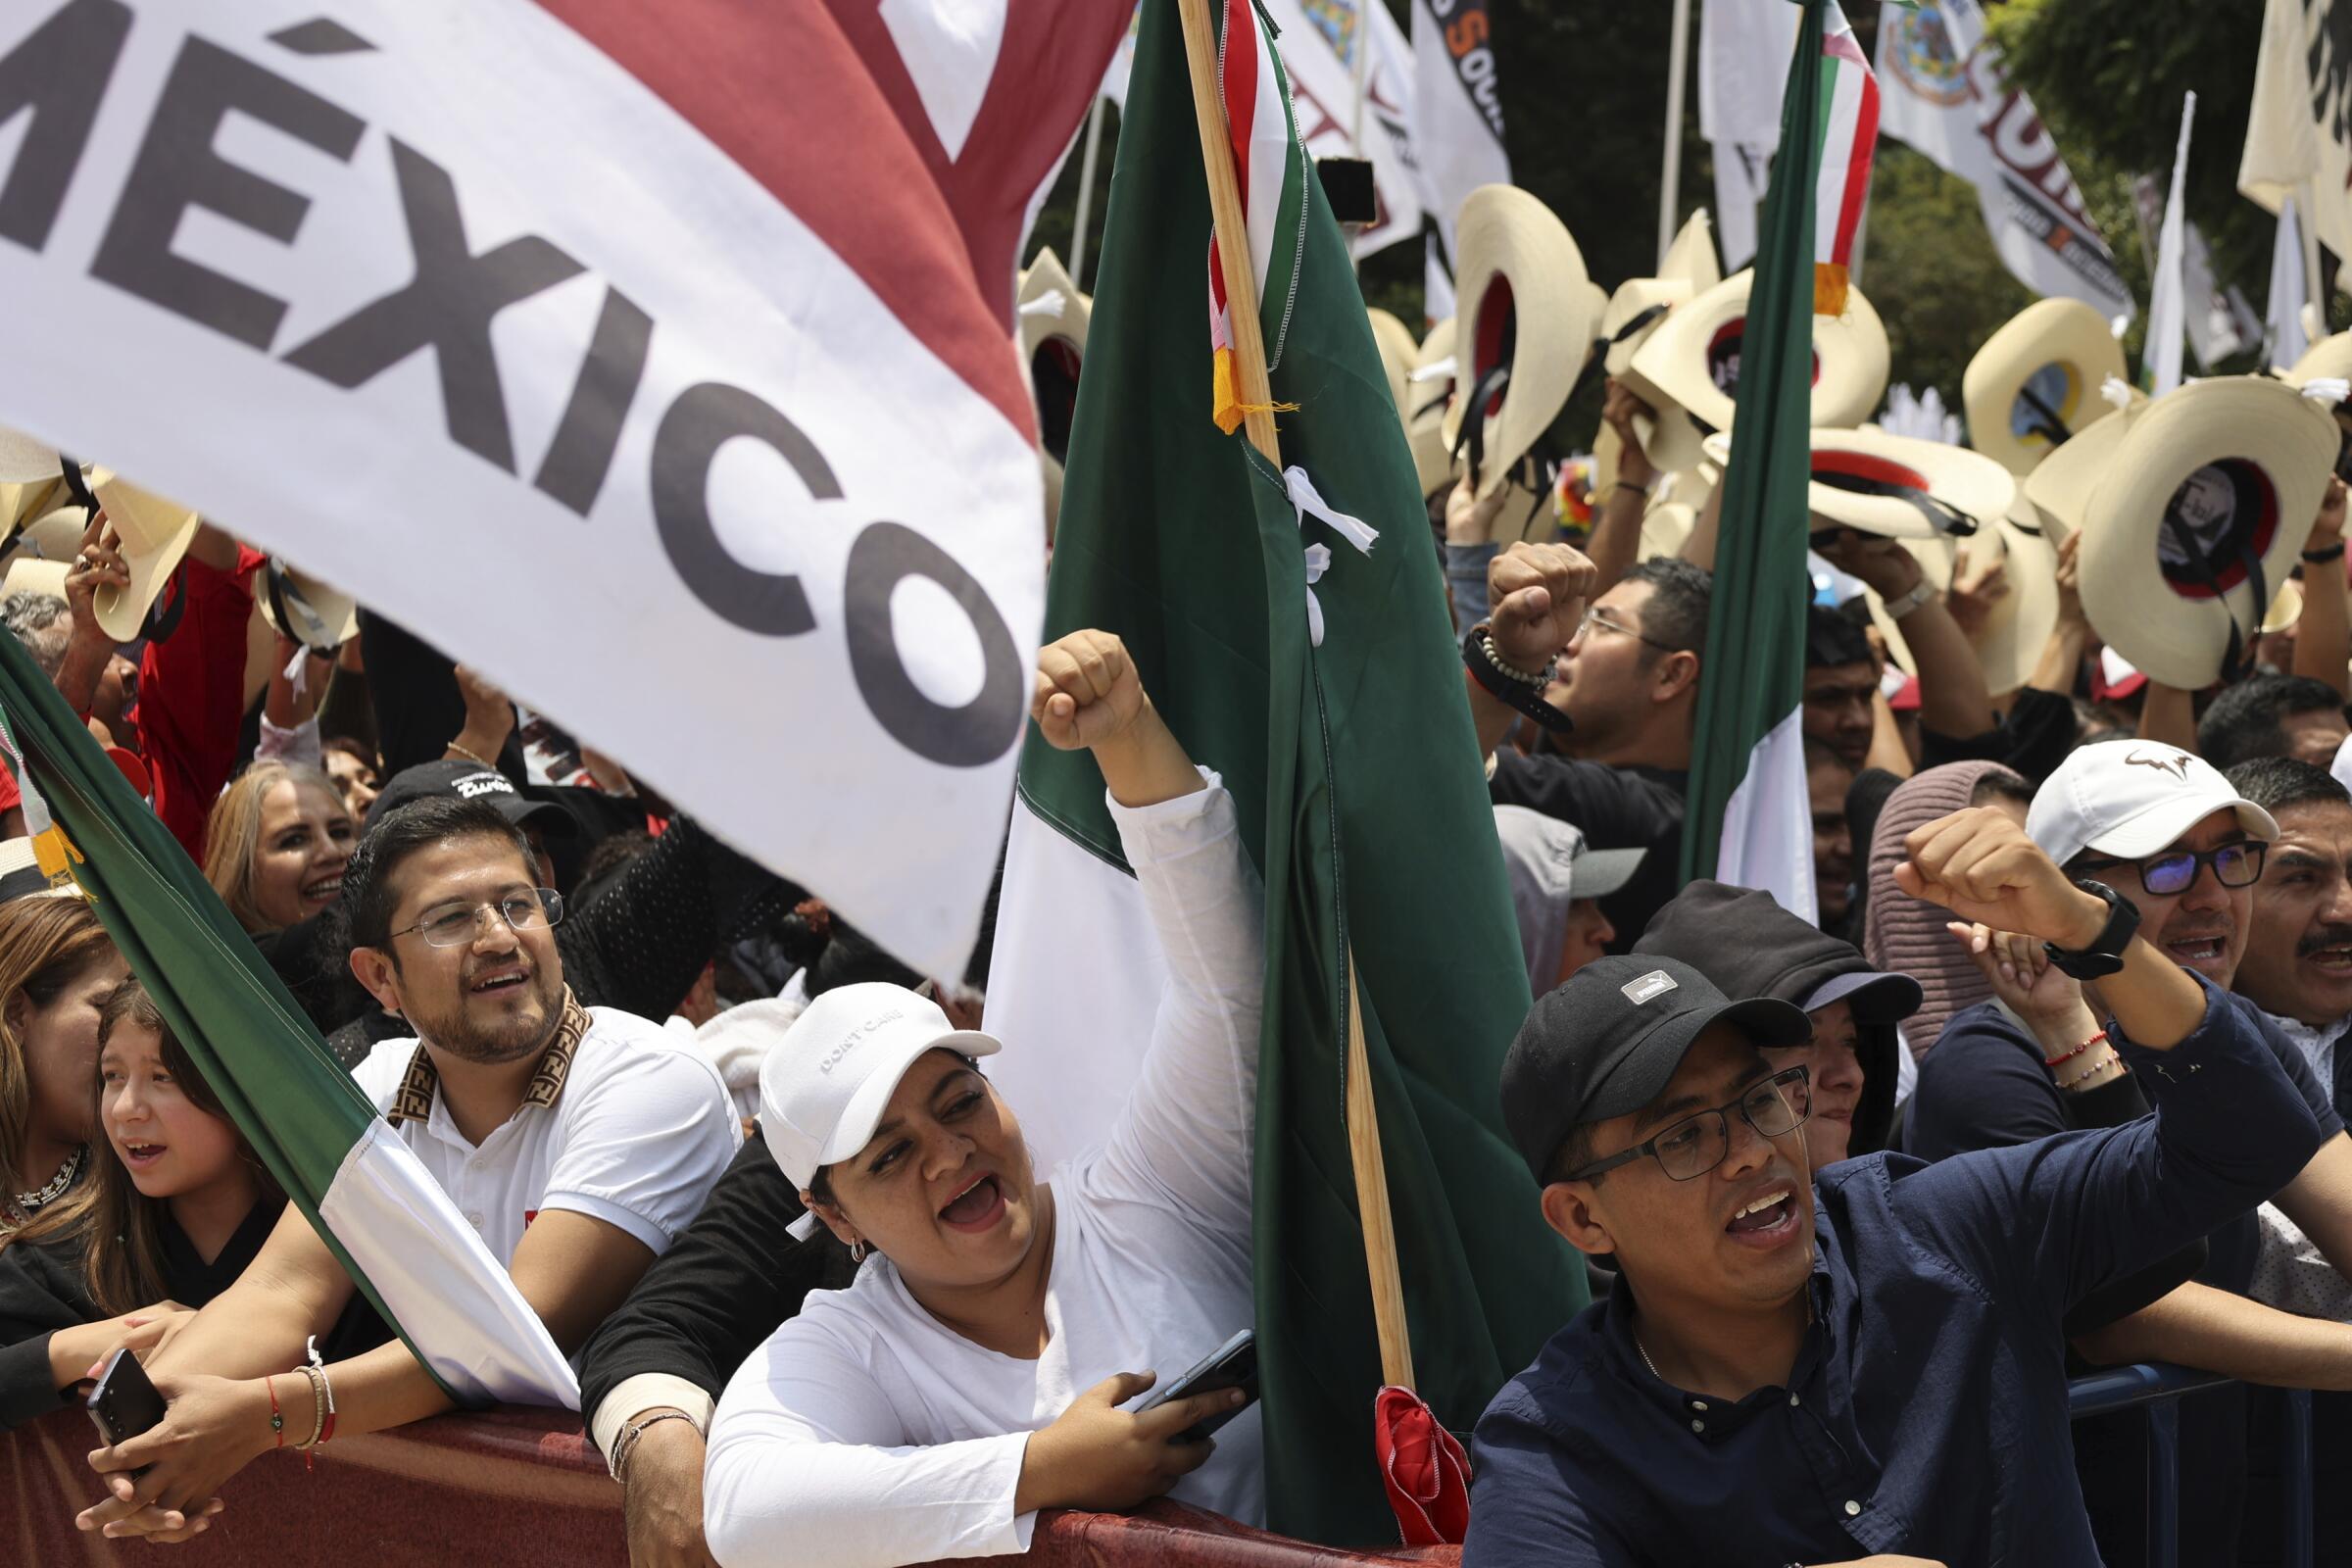 People cheer and hold Mexican flags at a rally.